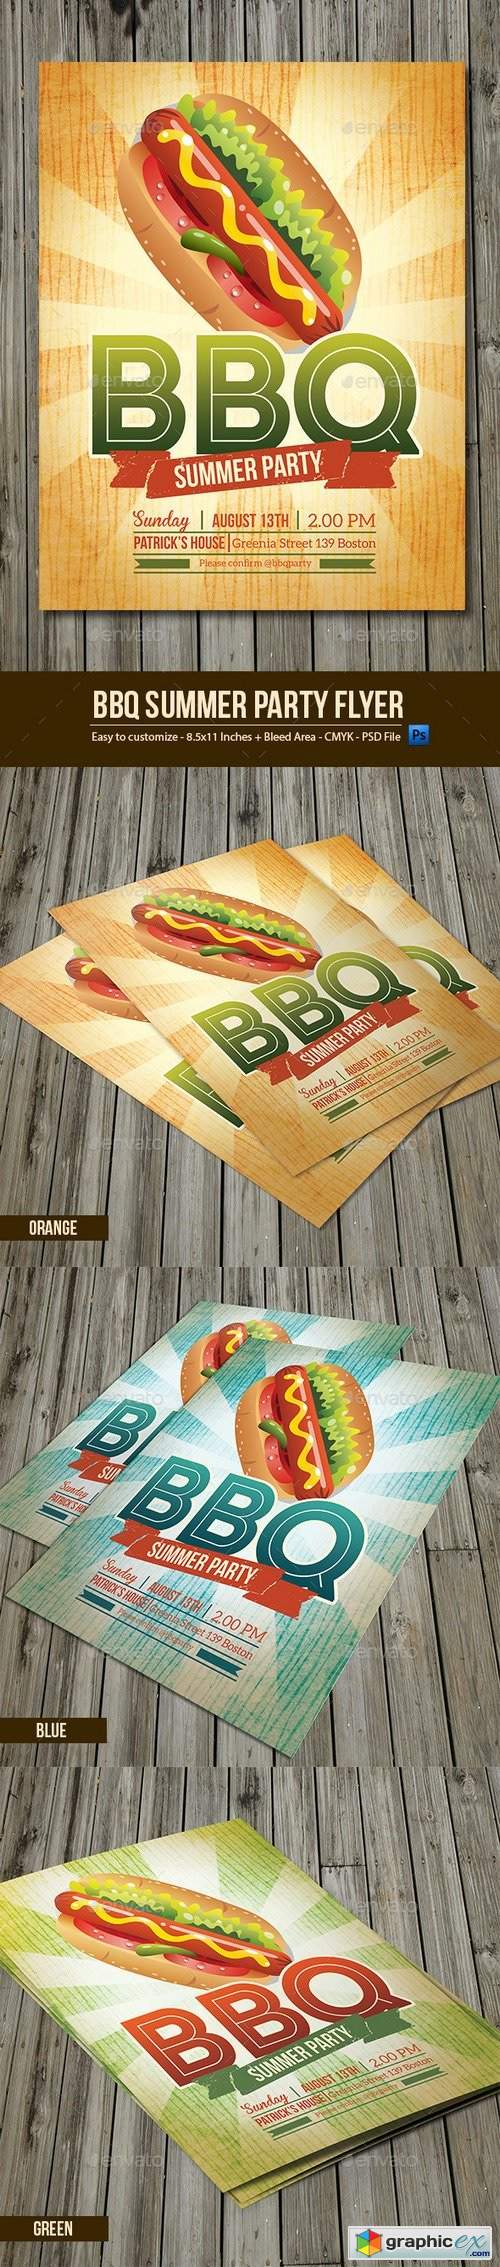 BBQ Summer Party Flyer 9997740